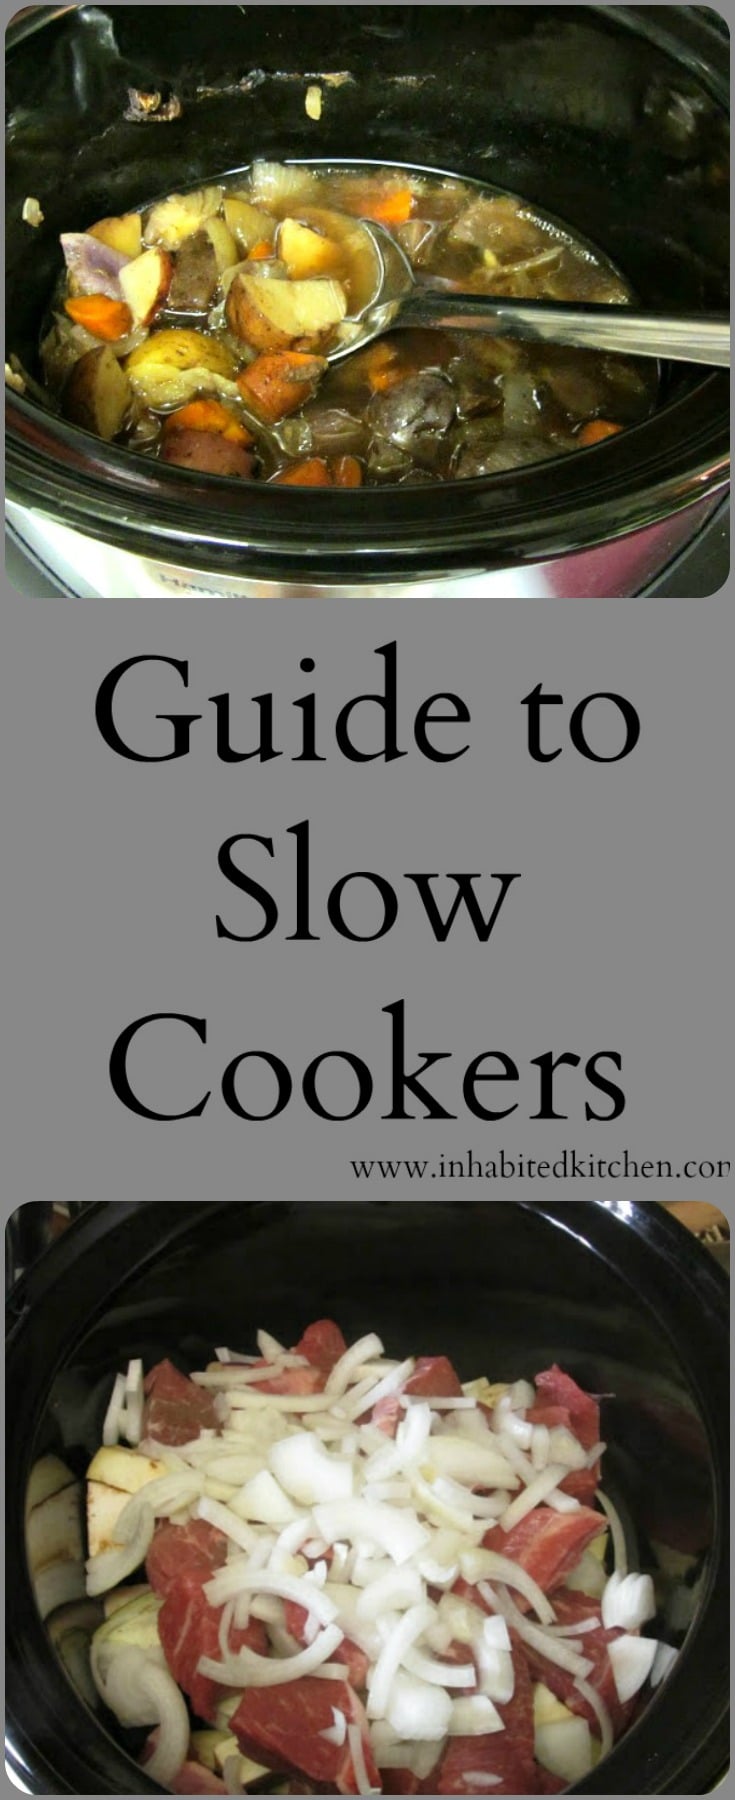 Are you trying to decide what would be the best slow cooker for your family - or for a gift? The Guide to Slow Cookers helps you evaluate your needs!